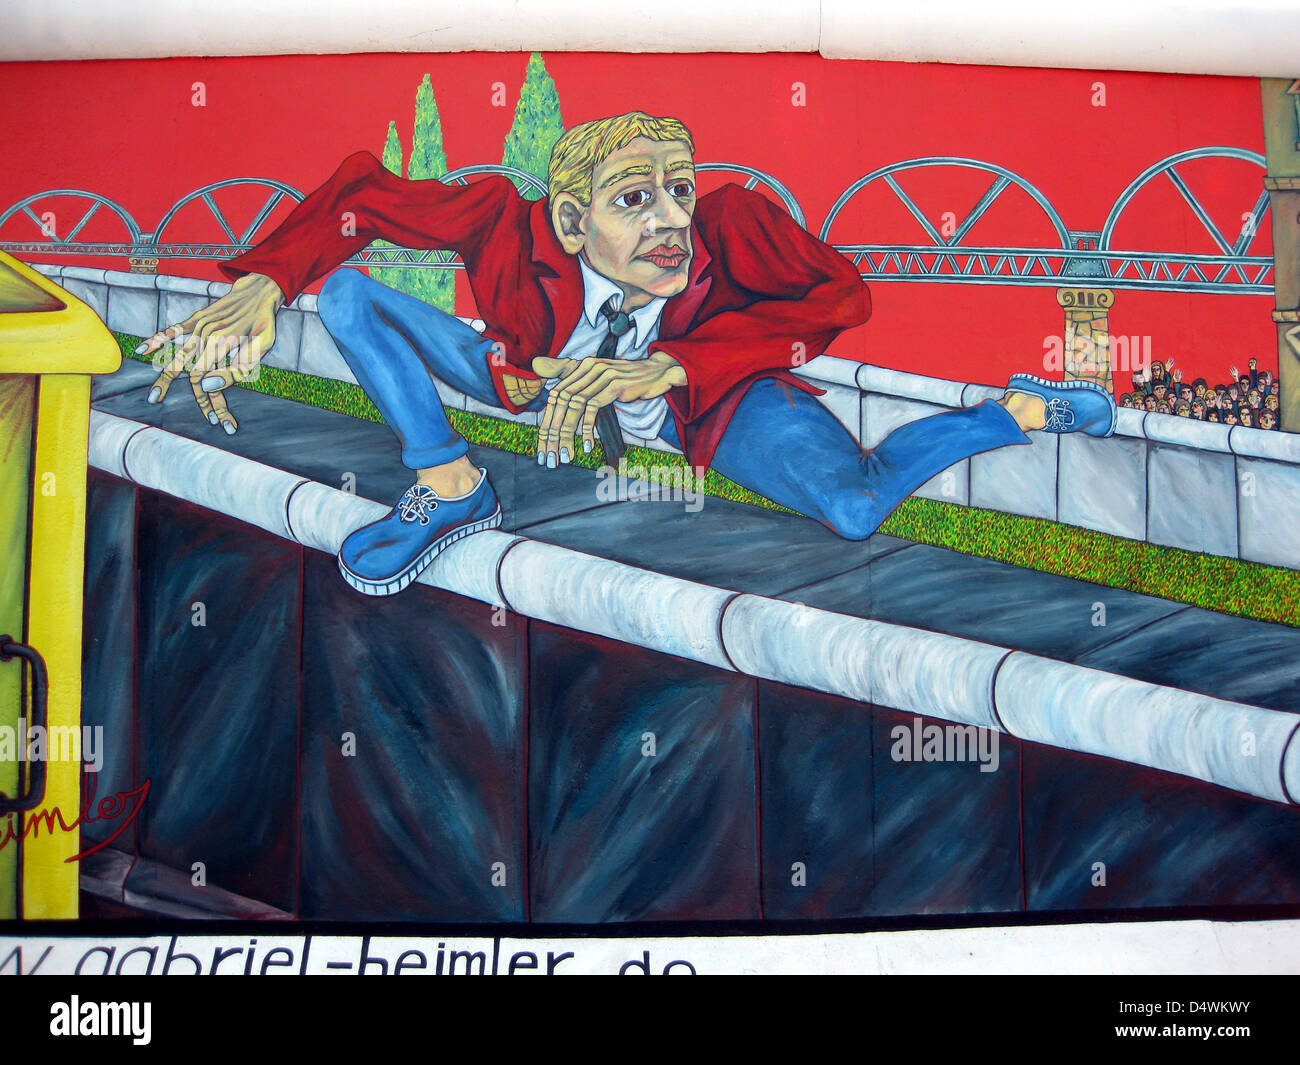 The artwork by Gabriel Heimler, 'Der Mauerspringer' (The Wall Vaulter), is pictured on a section of the Berlin Wall at the East Side Gallery on Mühlenstrasse in Berlin, Germany, in August 2009. The concrete parts of the Berlin Wall between Ostbahnhof and Warschauer Strasse were painted by international artists after the opening of the inner-German border in November 1989. Photo: Dieter Palm Stock Photo